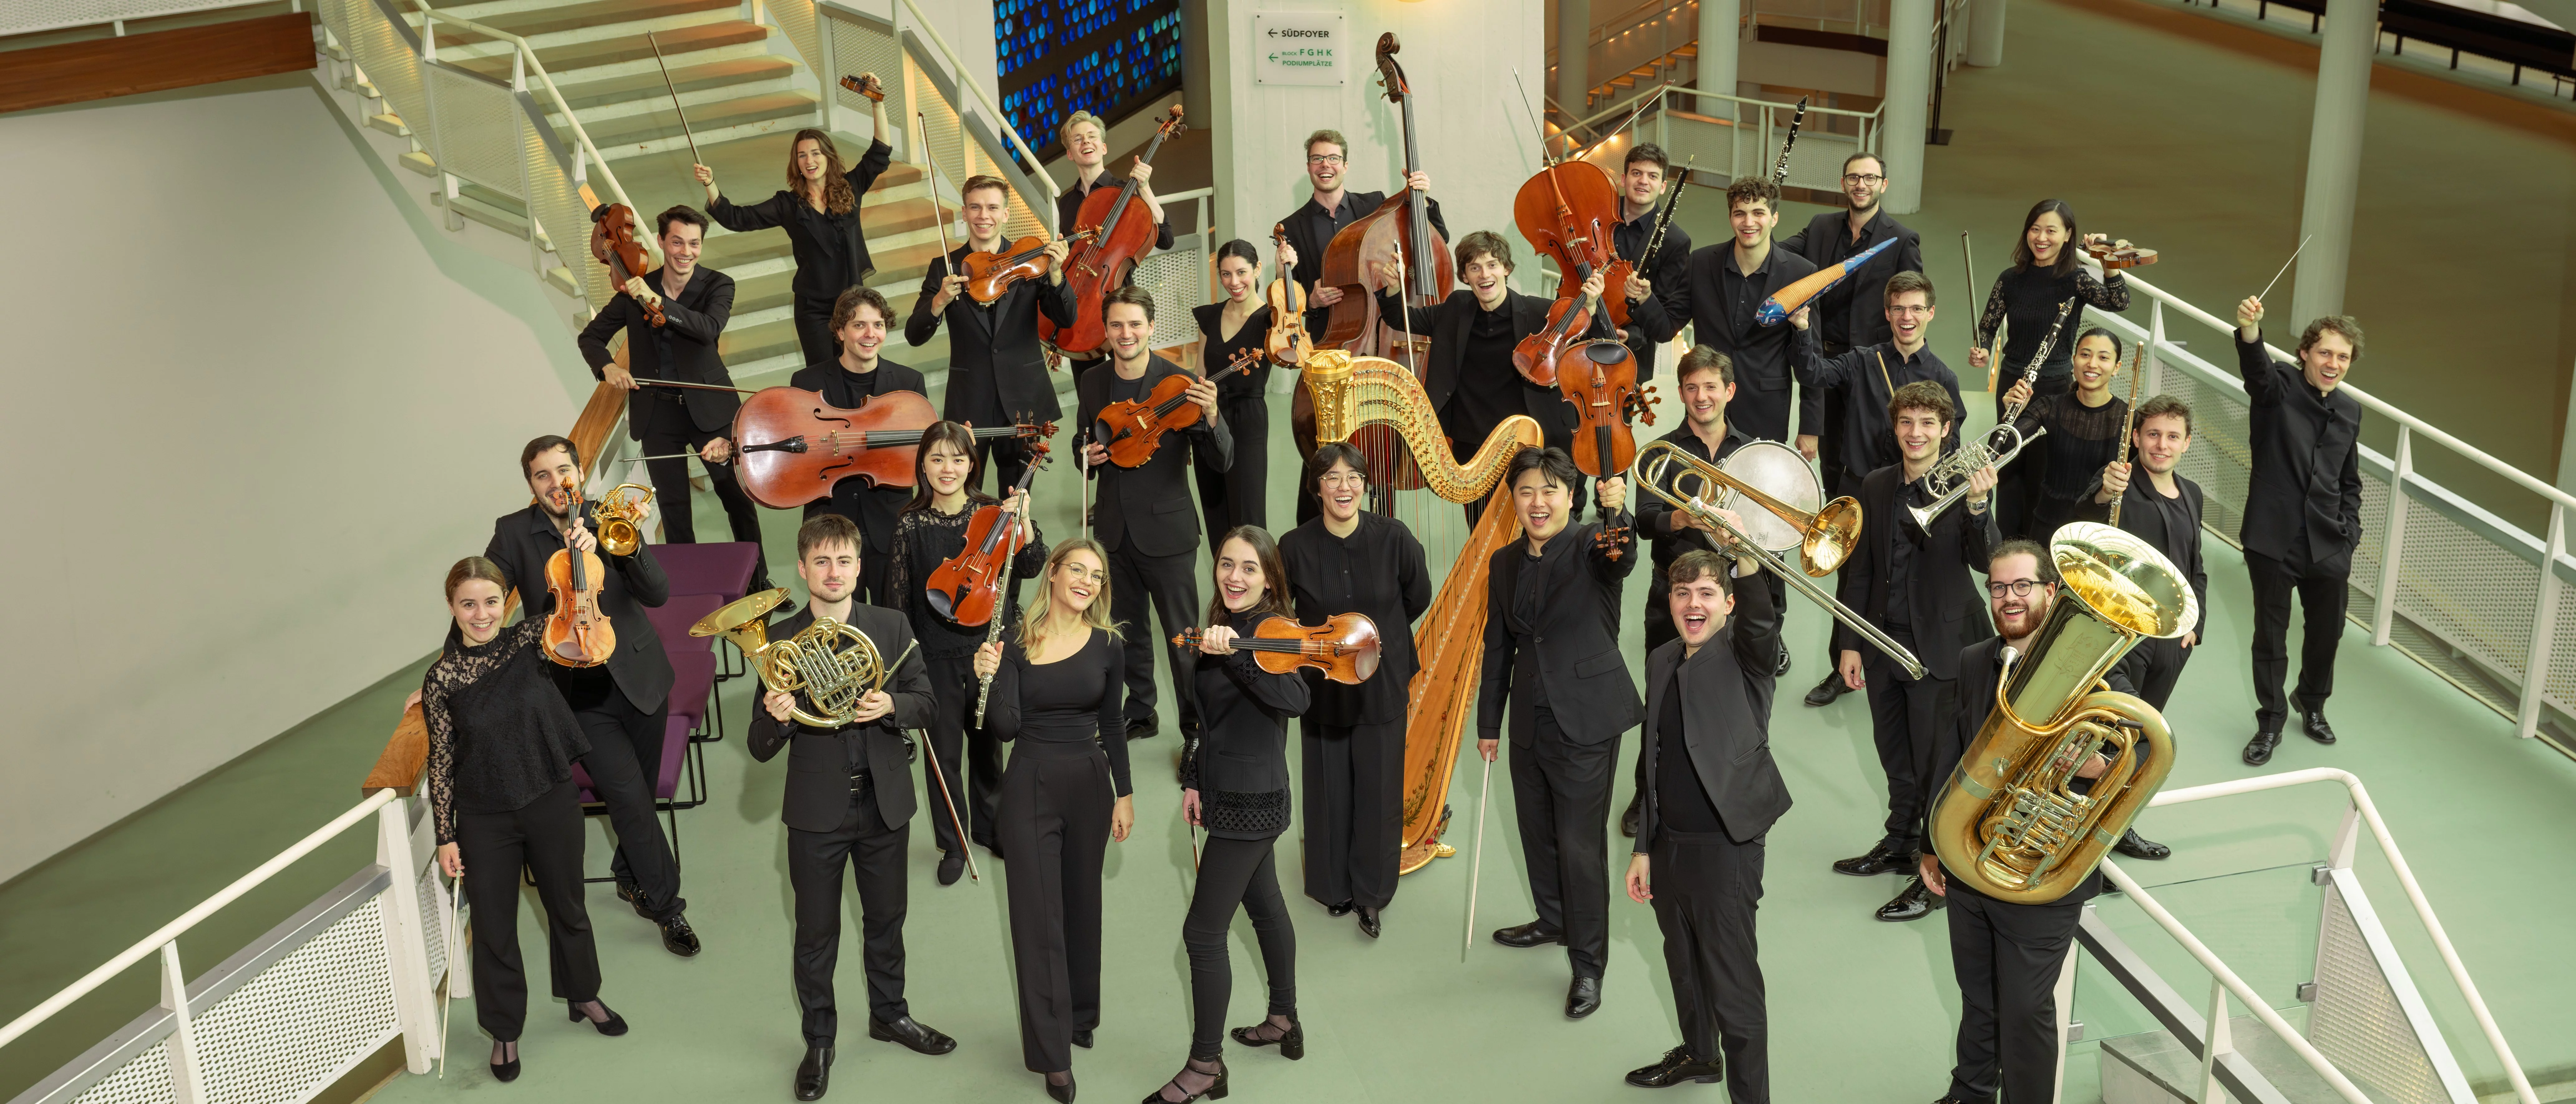 Group photo with musicians with their instruments in the foyer of the Philharmonie Berlin